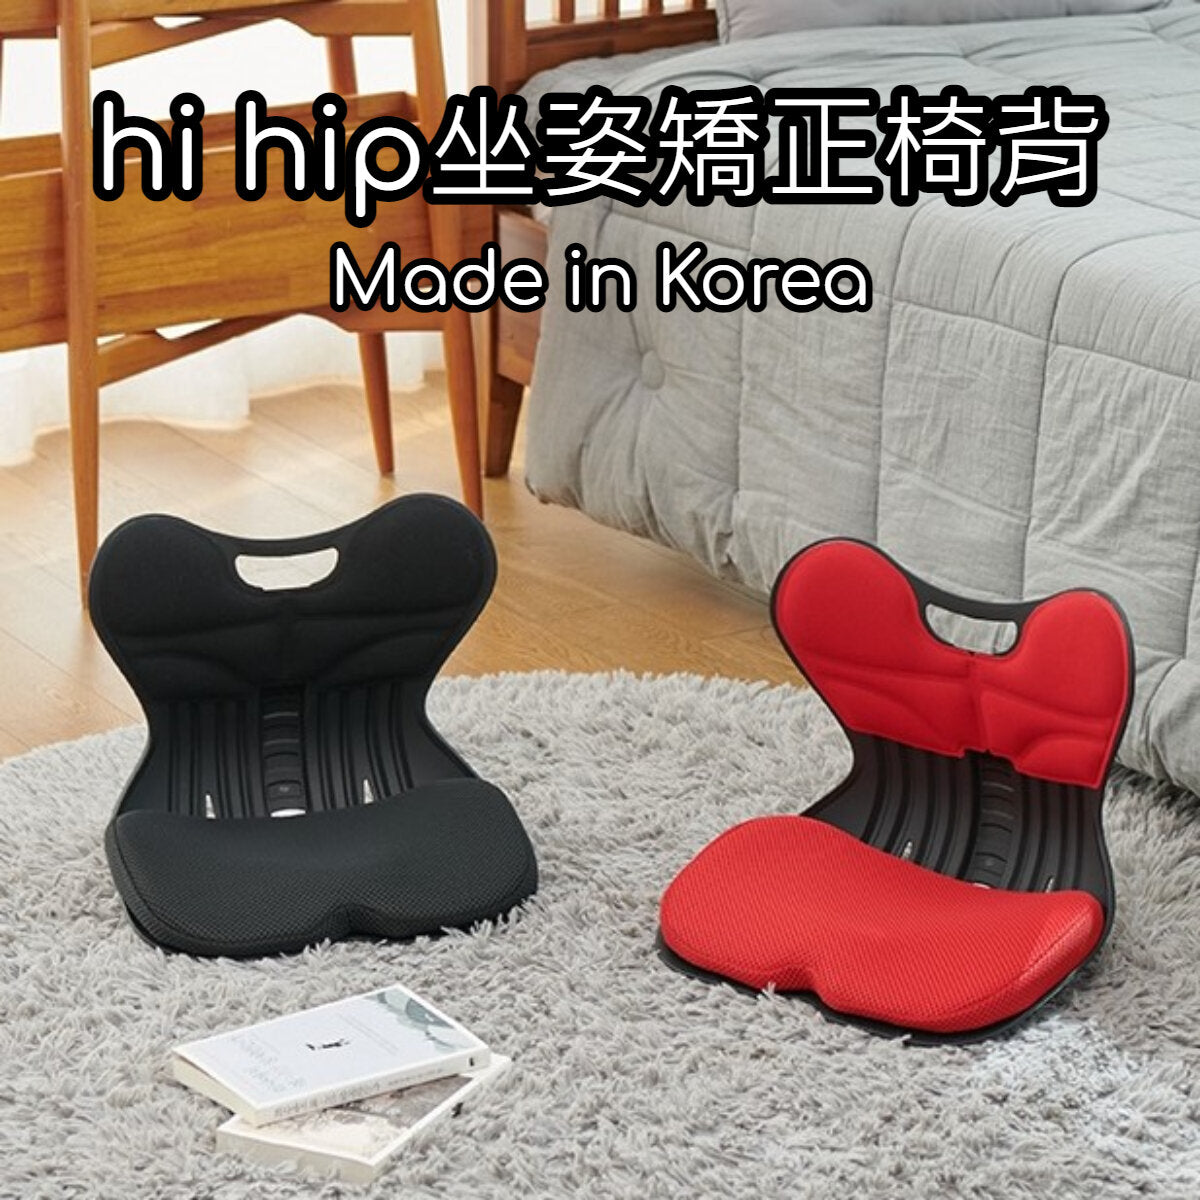 OTHER - hi hip posture correction chair back | spine protection cushion